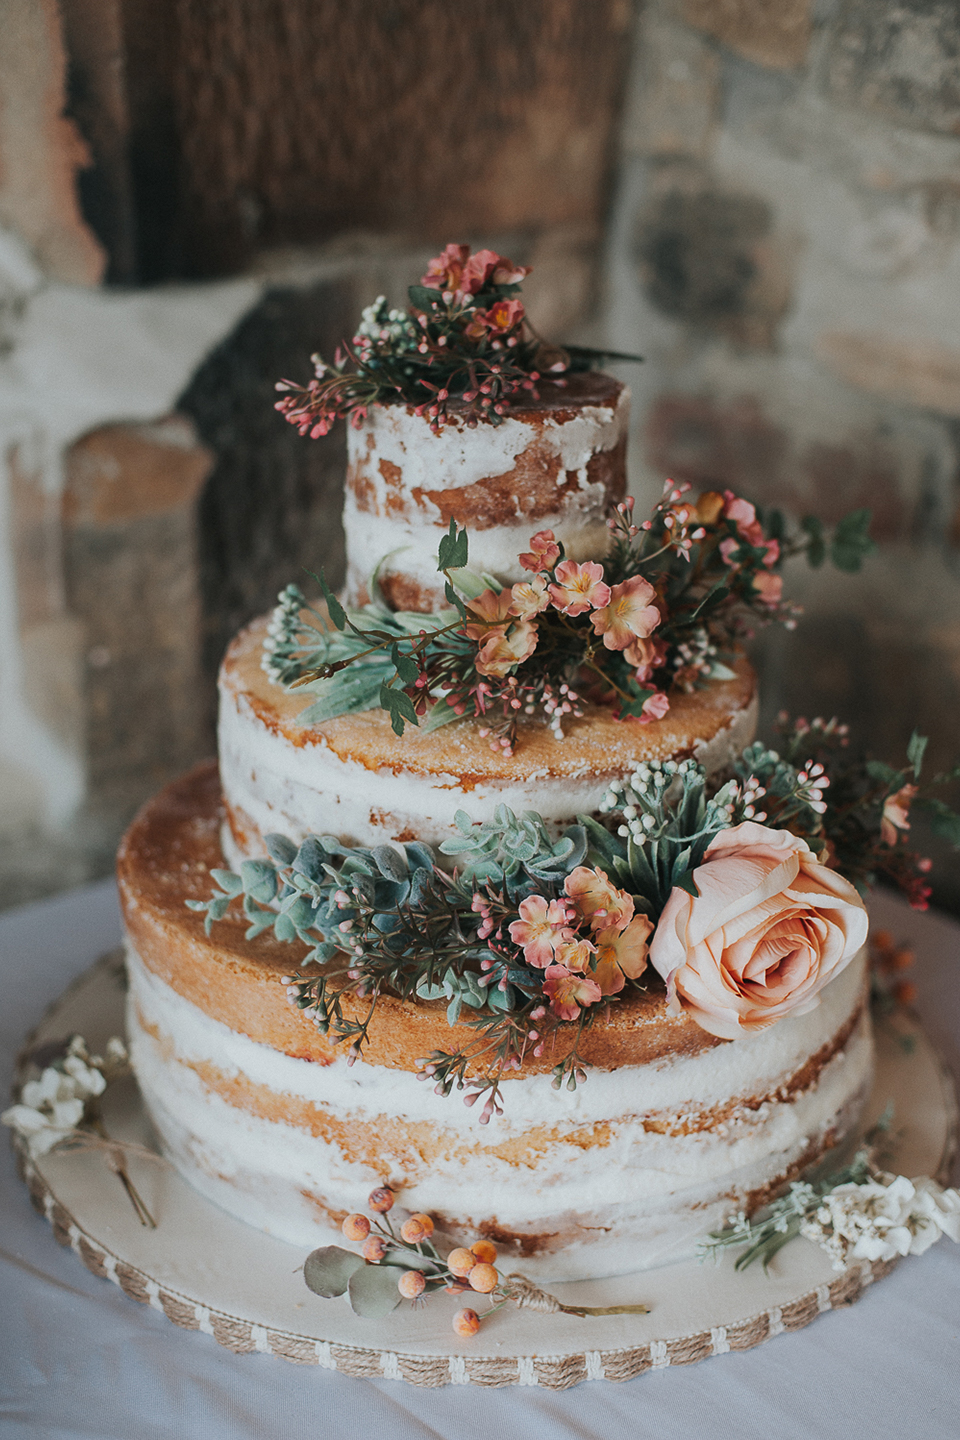 A naked wedding cake decorated with wild florals is the perfect choice for a rustic wedding at Bassmead Manor Barns